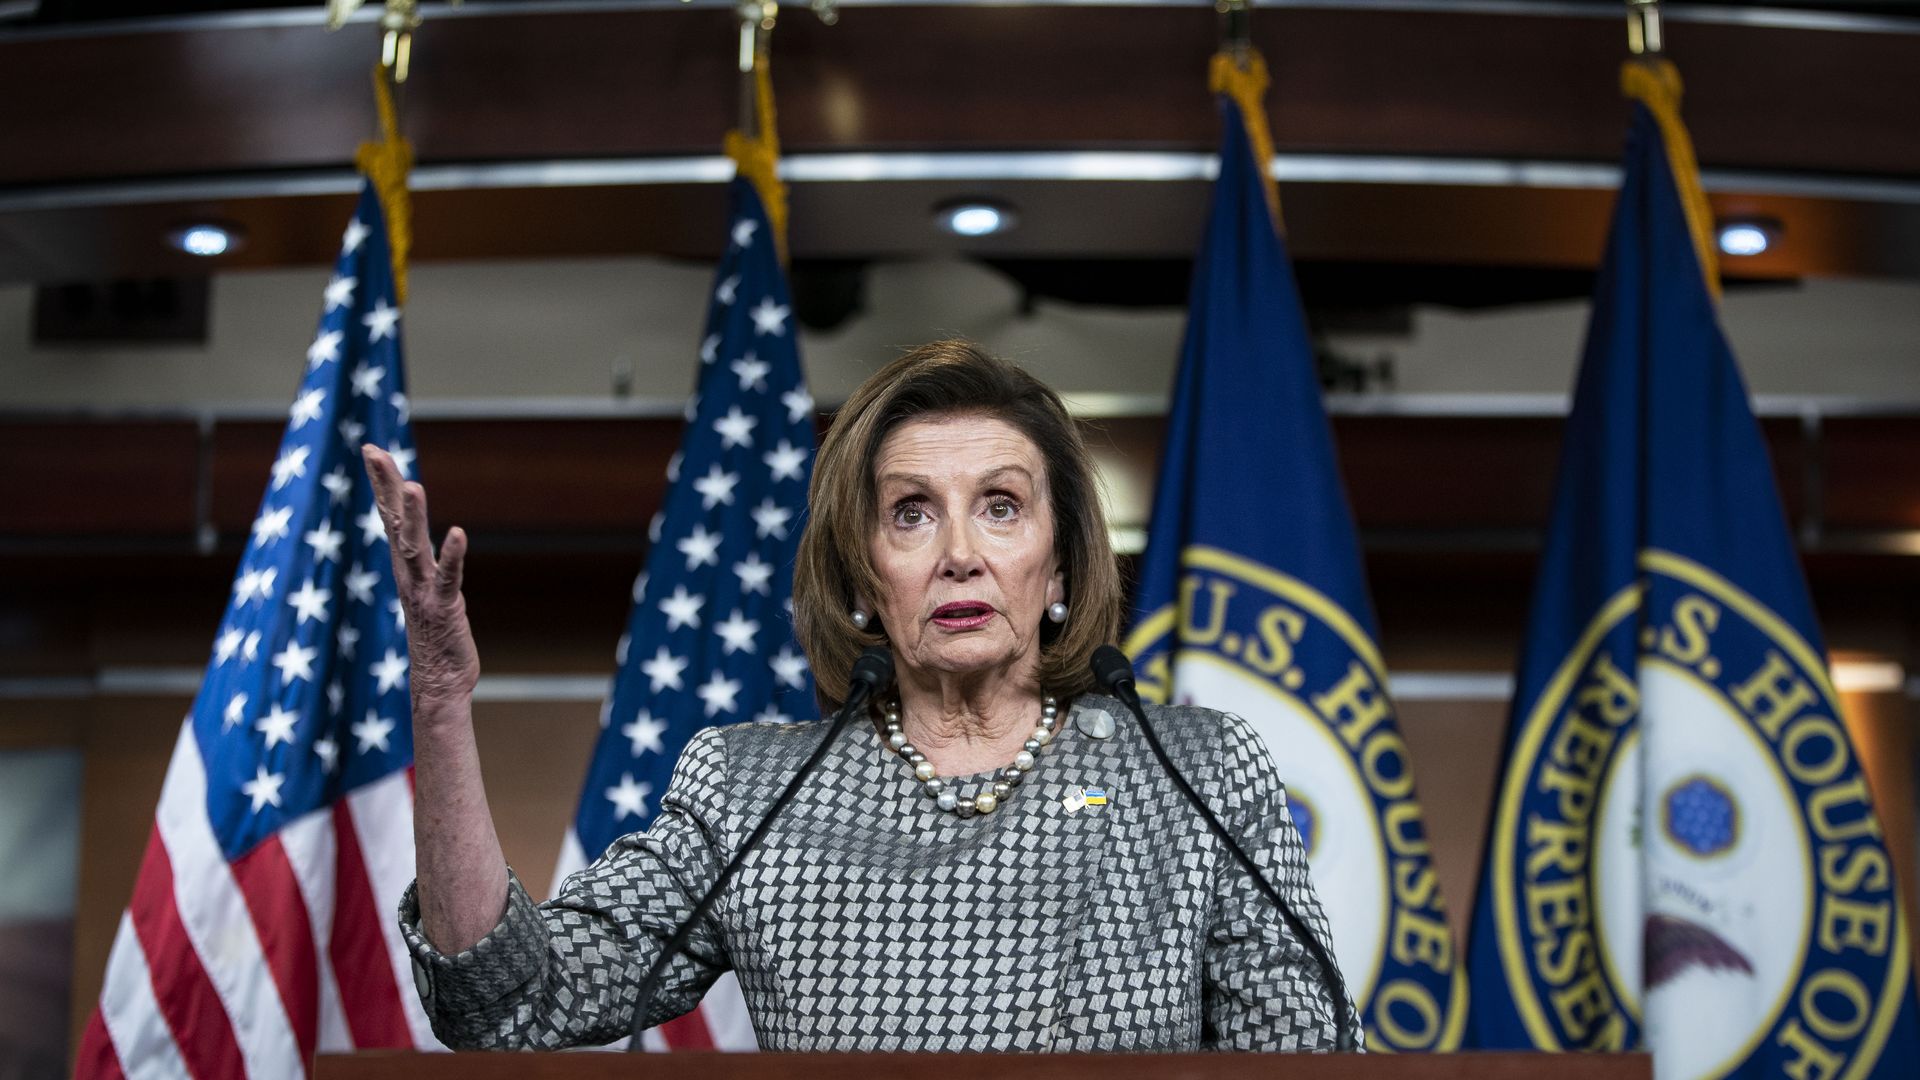 House Speaker Nancy Pelosi speaks at a press conference on March 3, 2022